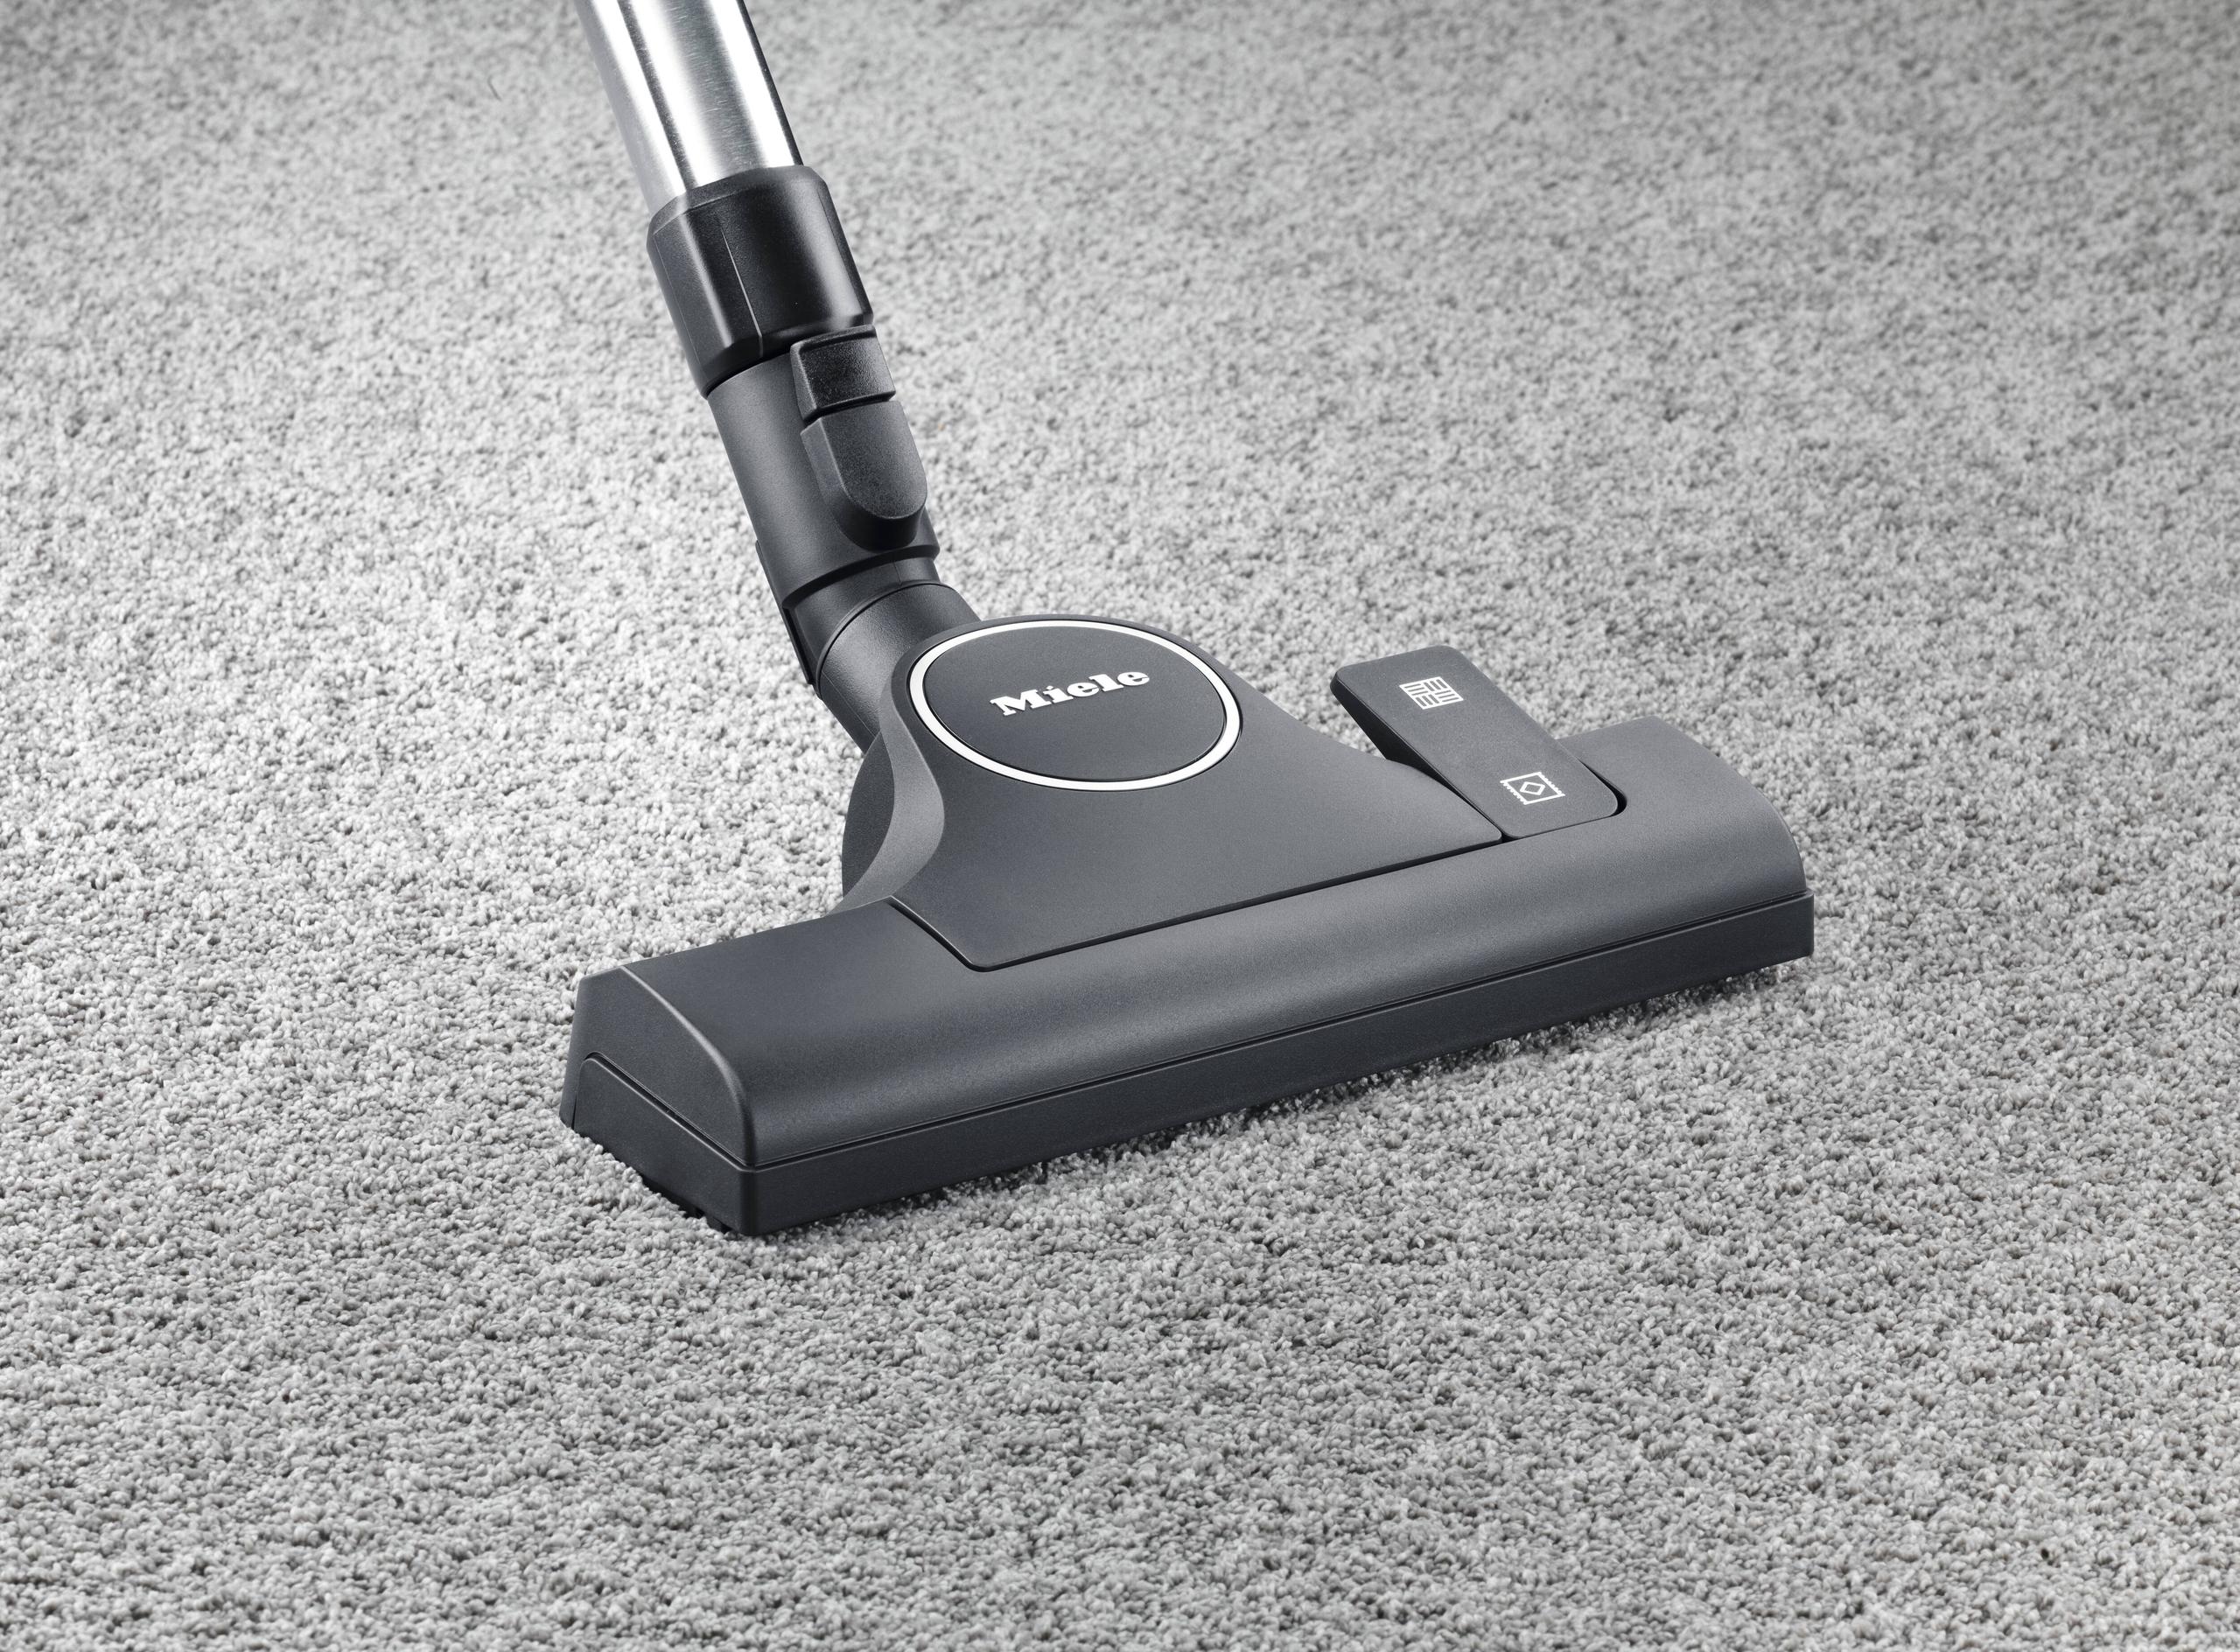 Miele CLASSICC1PURESUCTIONPOWERLINESBAN0GRAPHITEGREY Classic C1 Pure Suction Powerline - Sban0 - Canister Vacuum Cleaners High Suction Power For Thorough Vacuuming At An Attractive Entry Level Price.